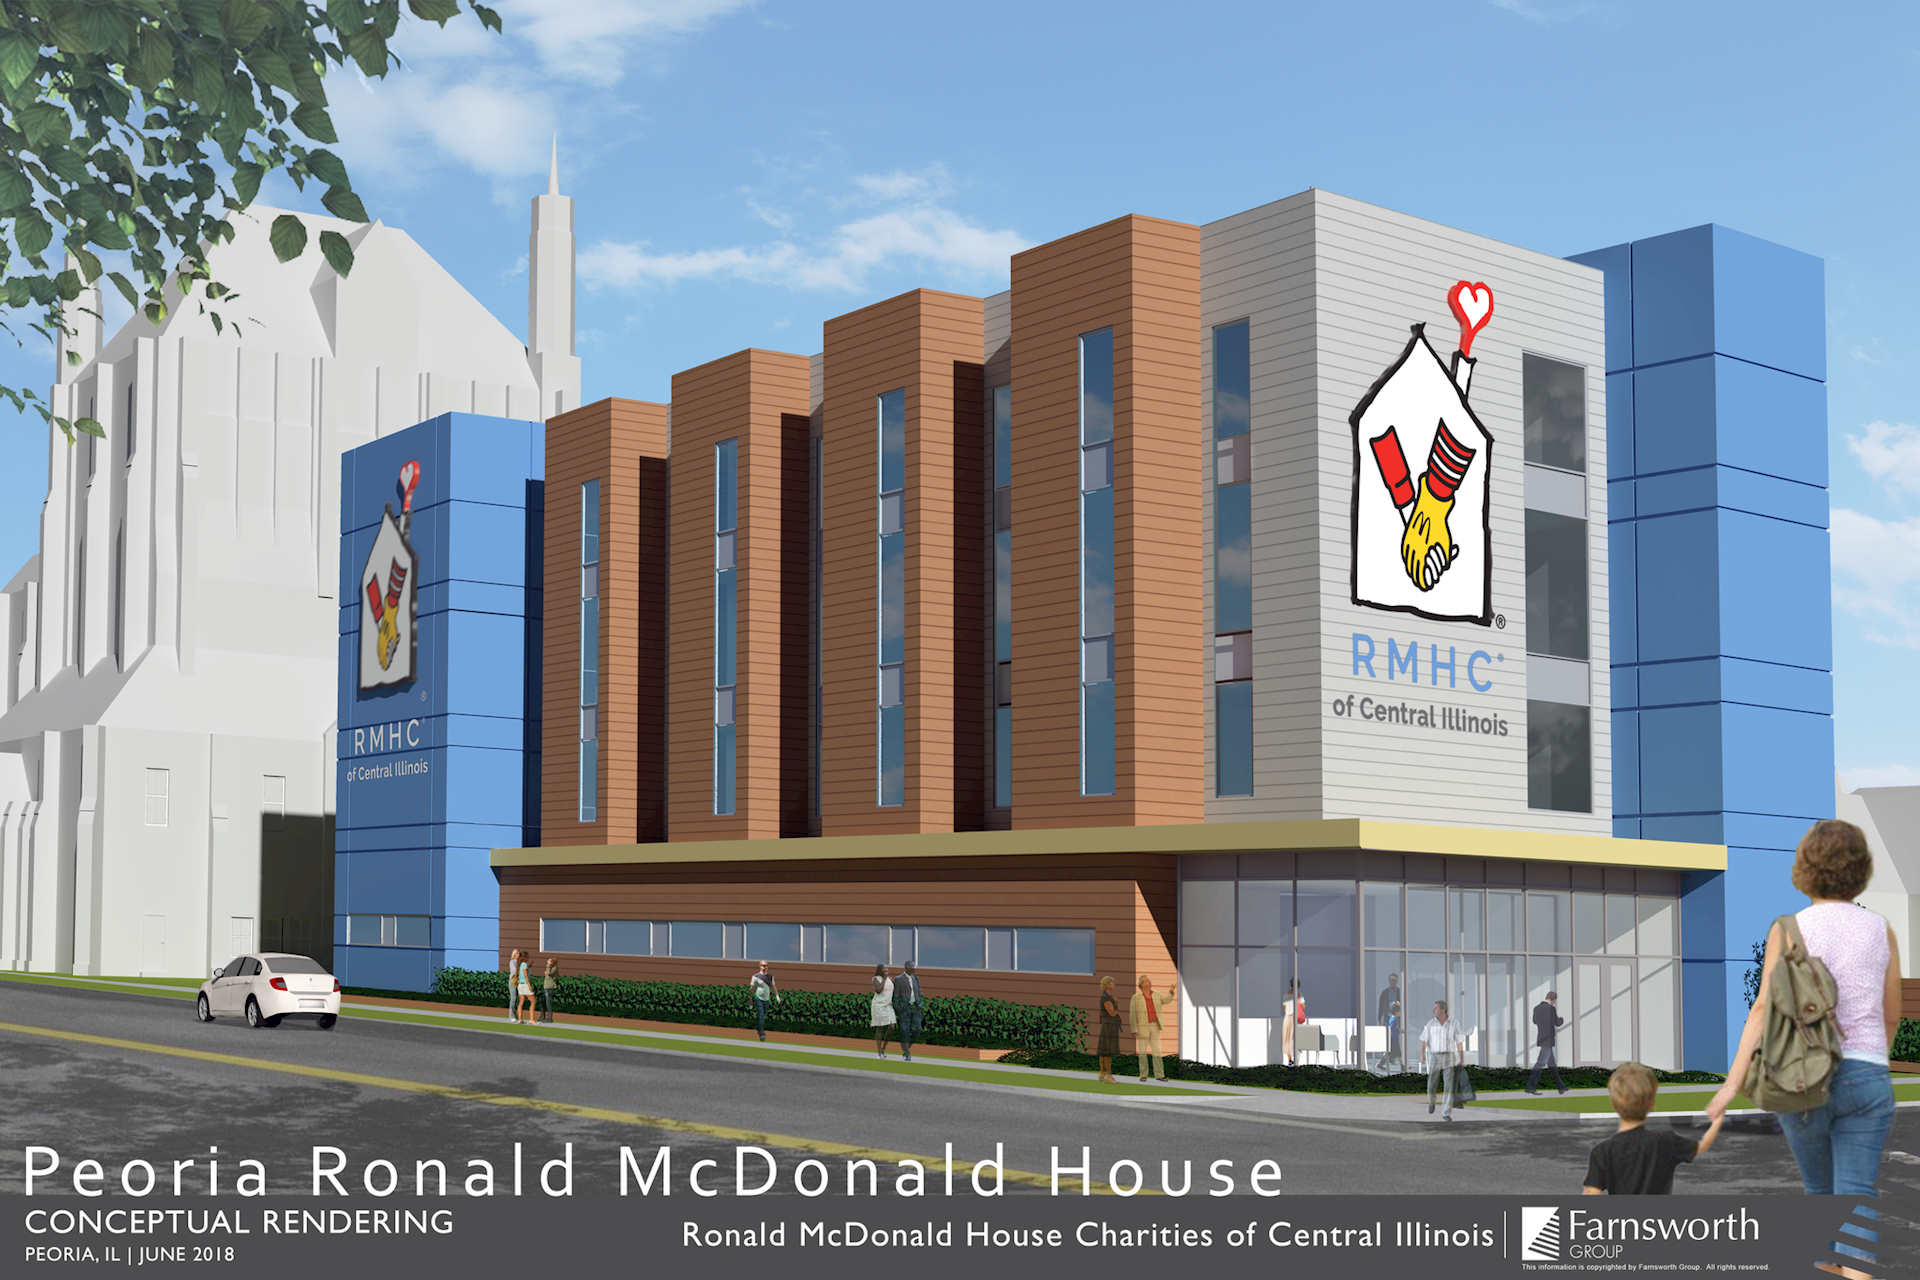 Ronald McDonald House Charities of Central Illinois is the latest addition to the city’s medical district.